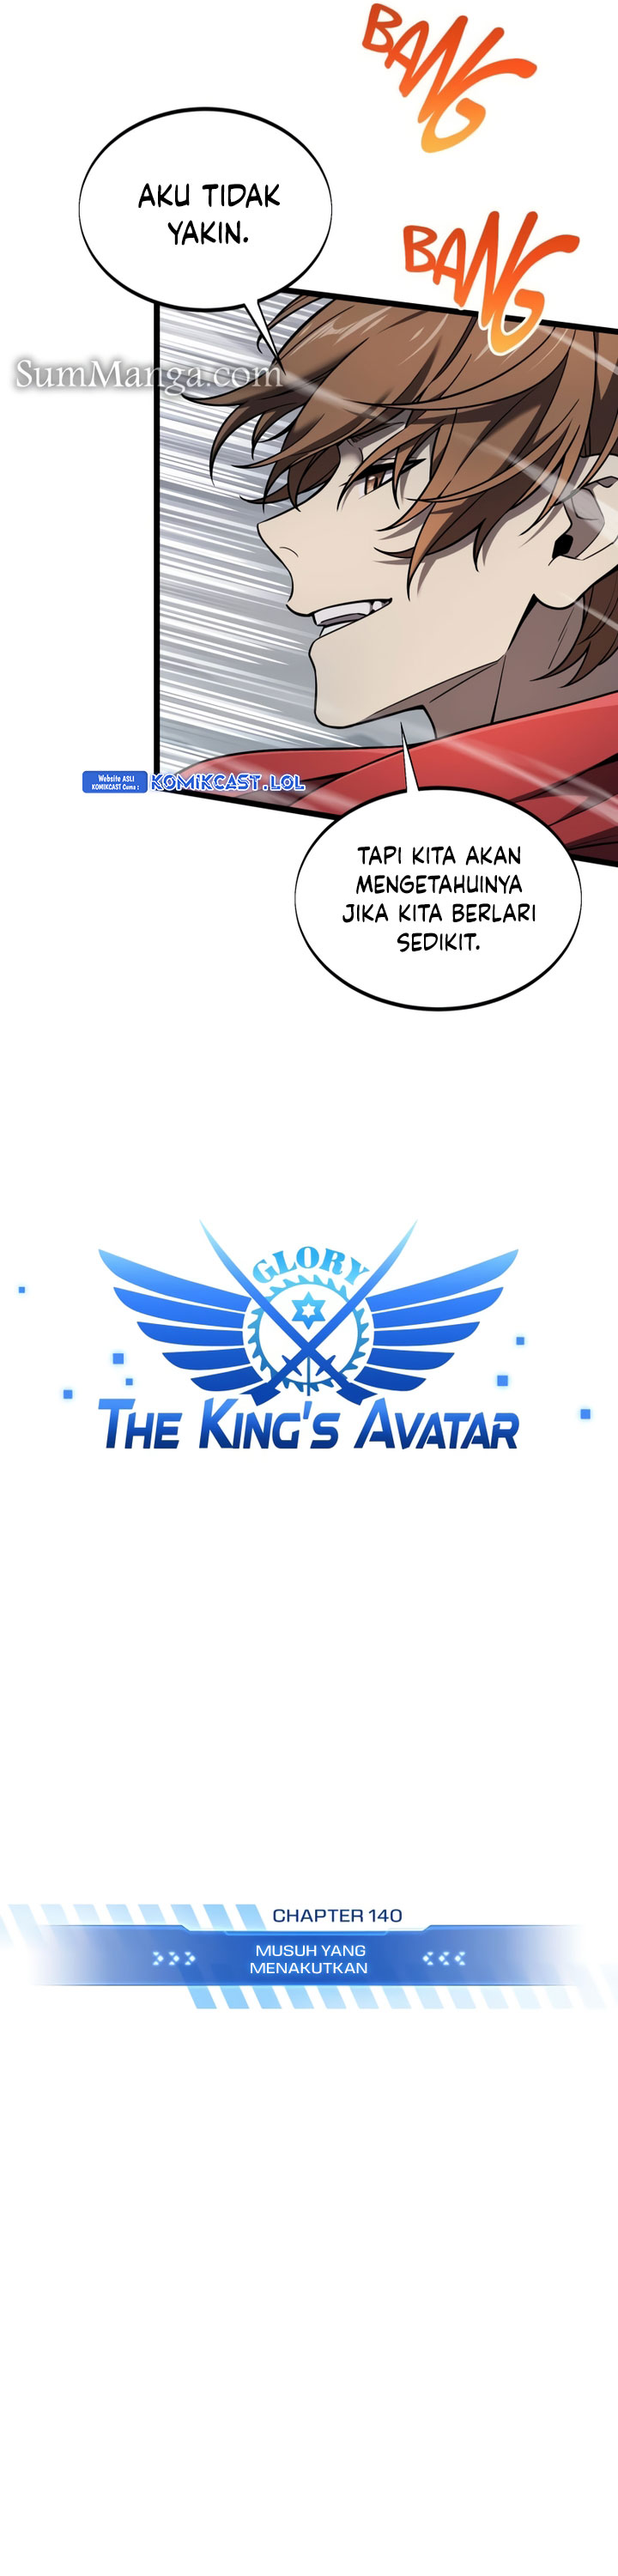 The King’s Avatar (2020) Chapter 140